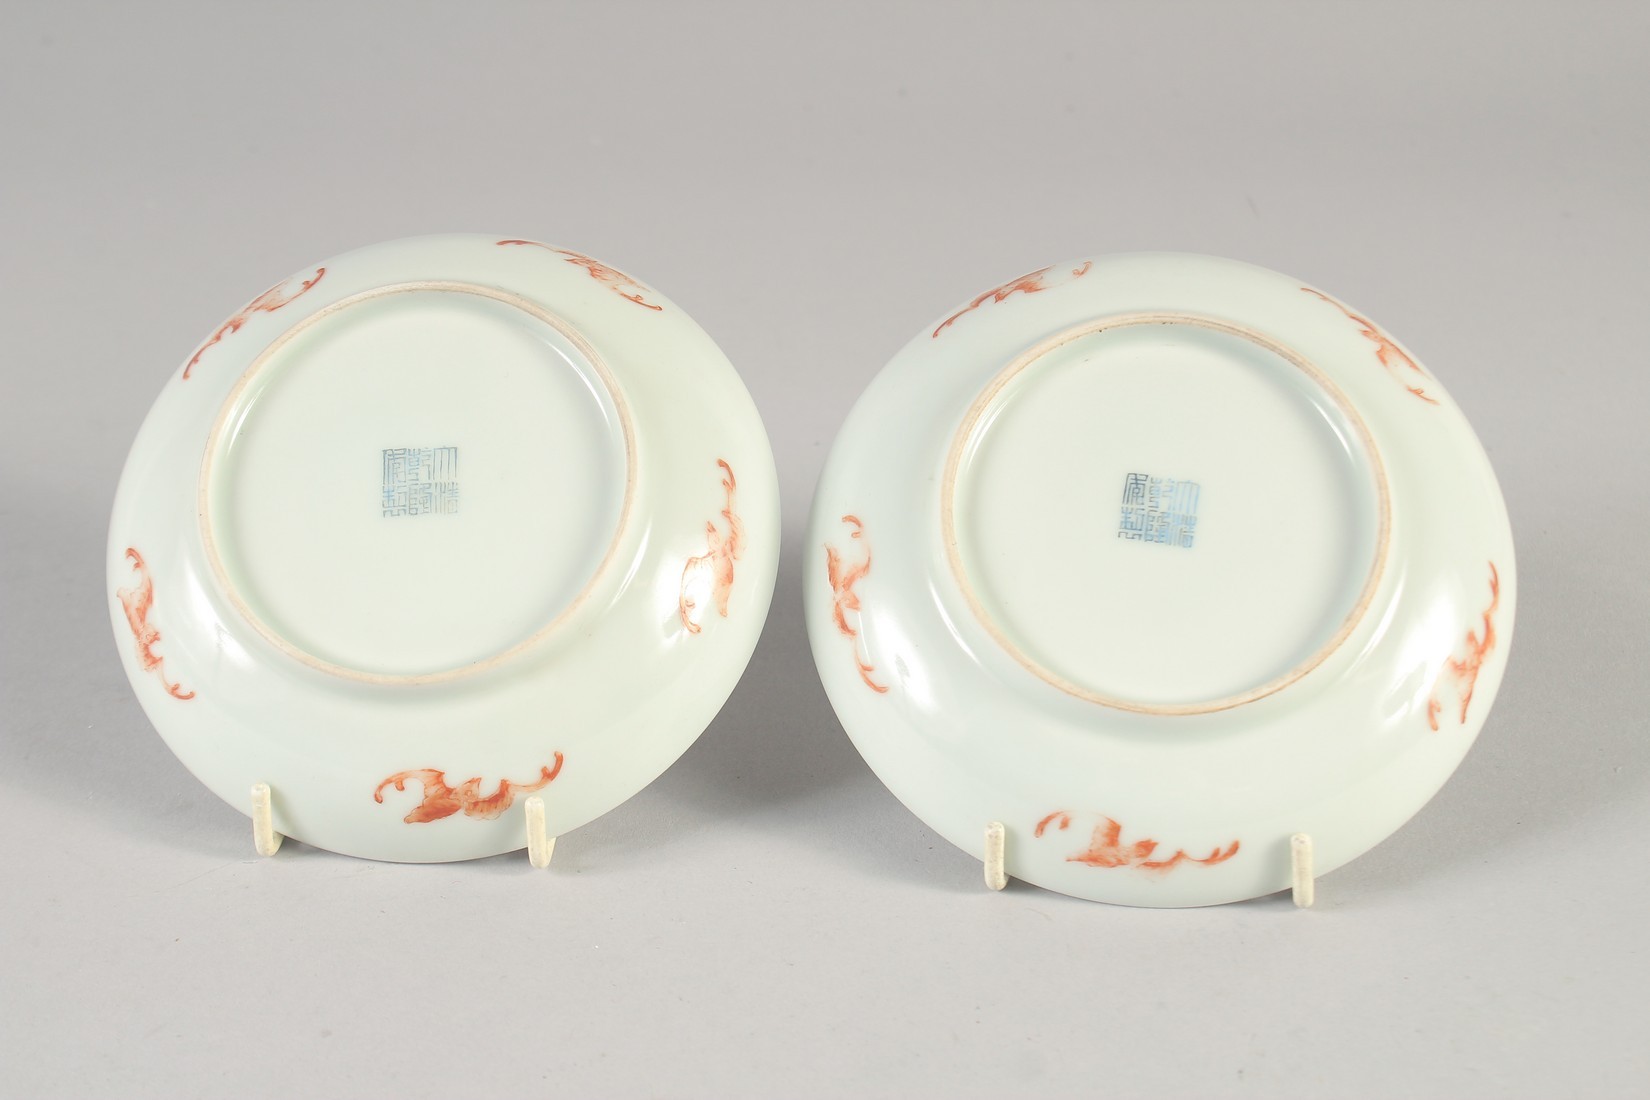 A PAIR OF CHINESE FAMILLE ROSE PORCELAIN BUTTERFLY SAUCERS, six-character mark to base, 13.5cm - Image 2 of 2